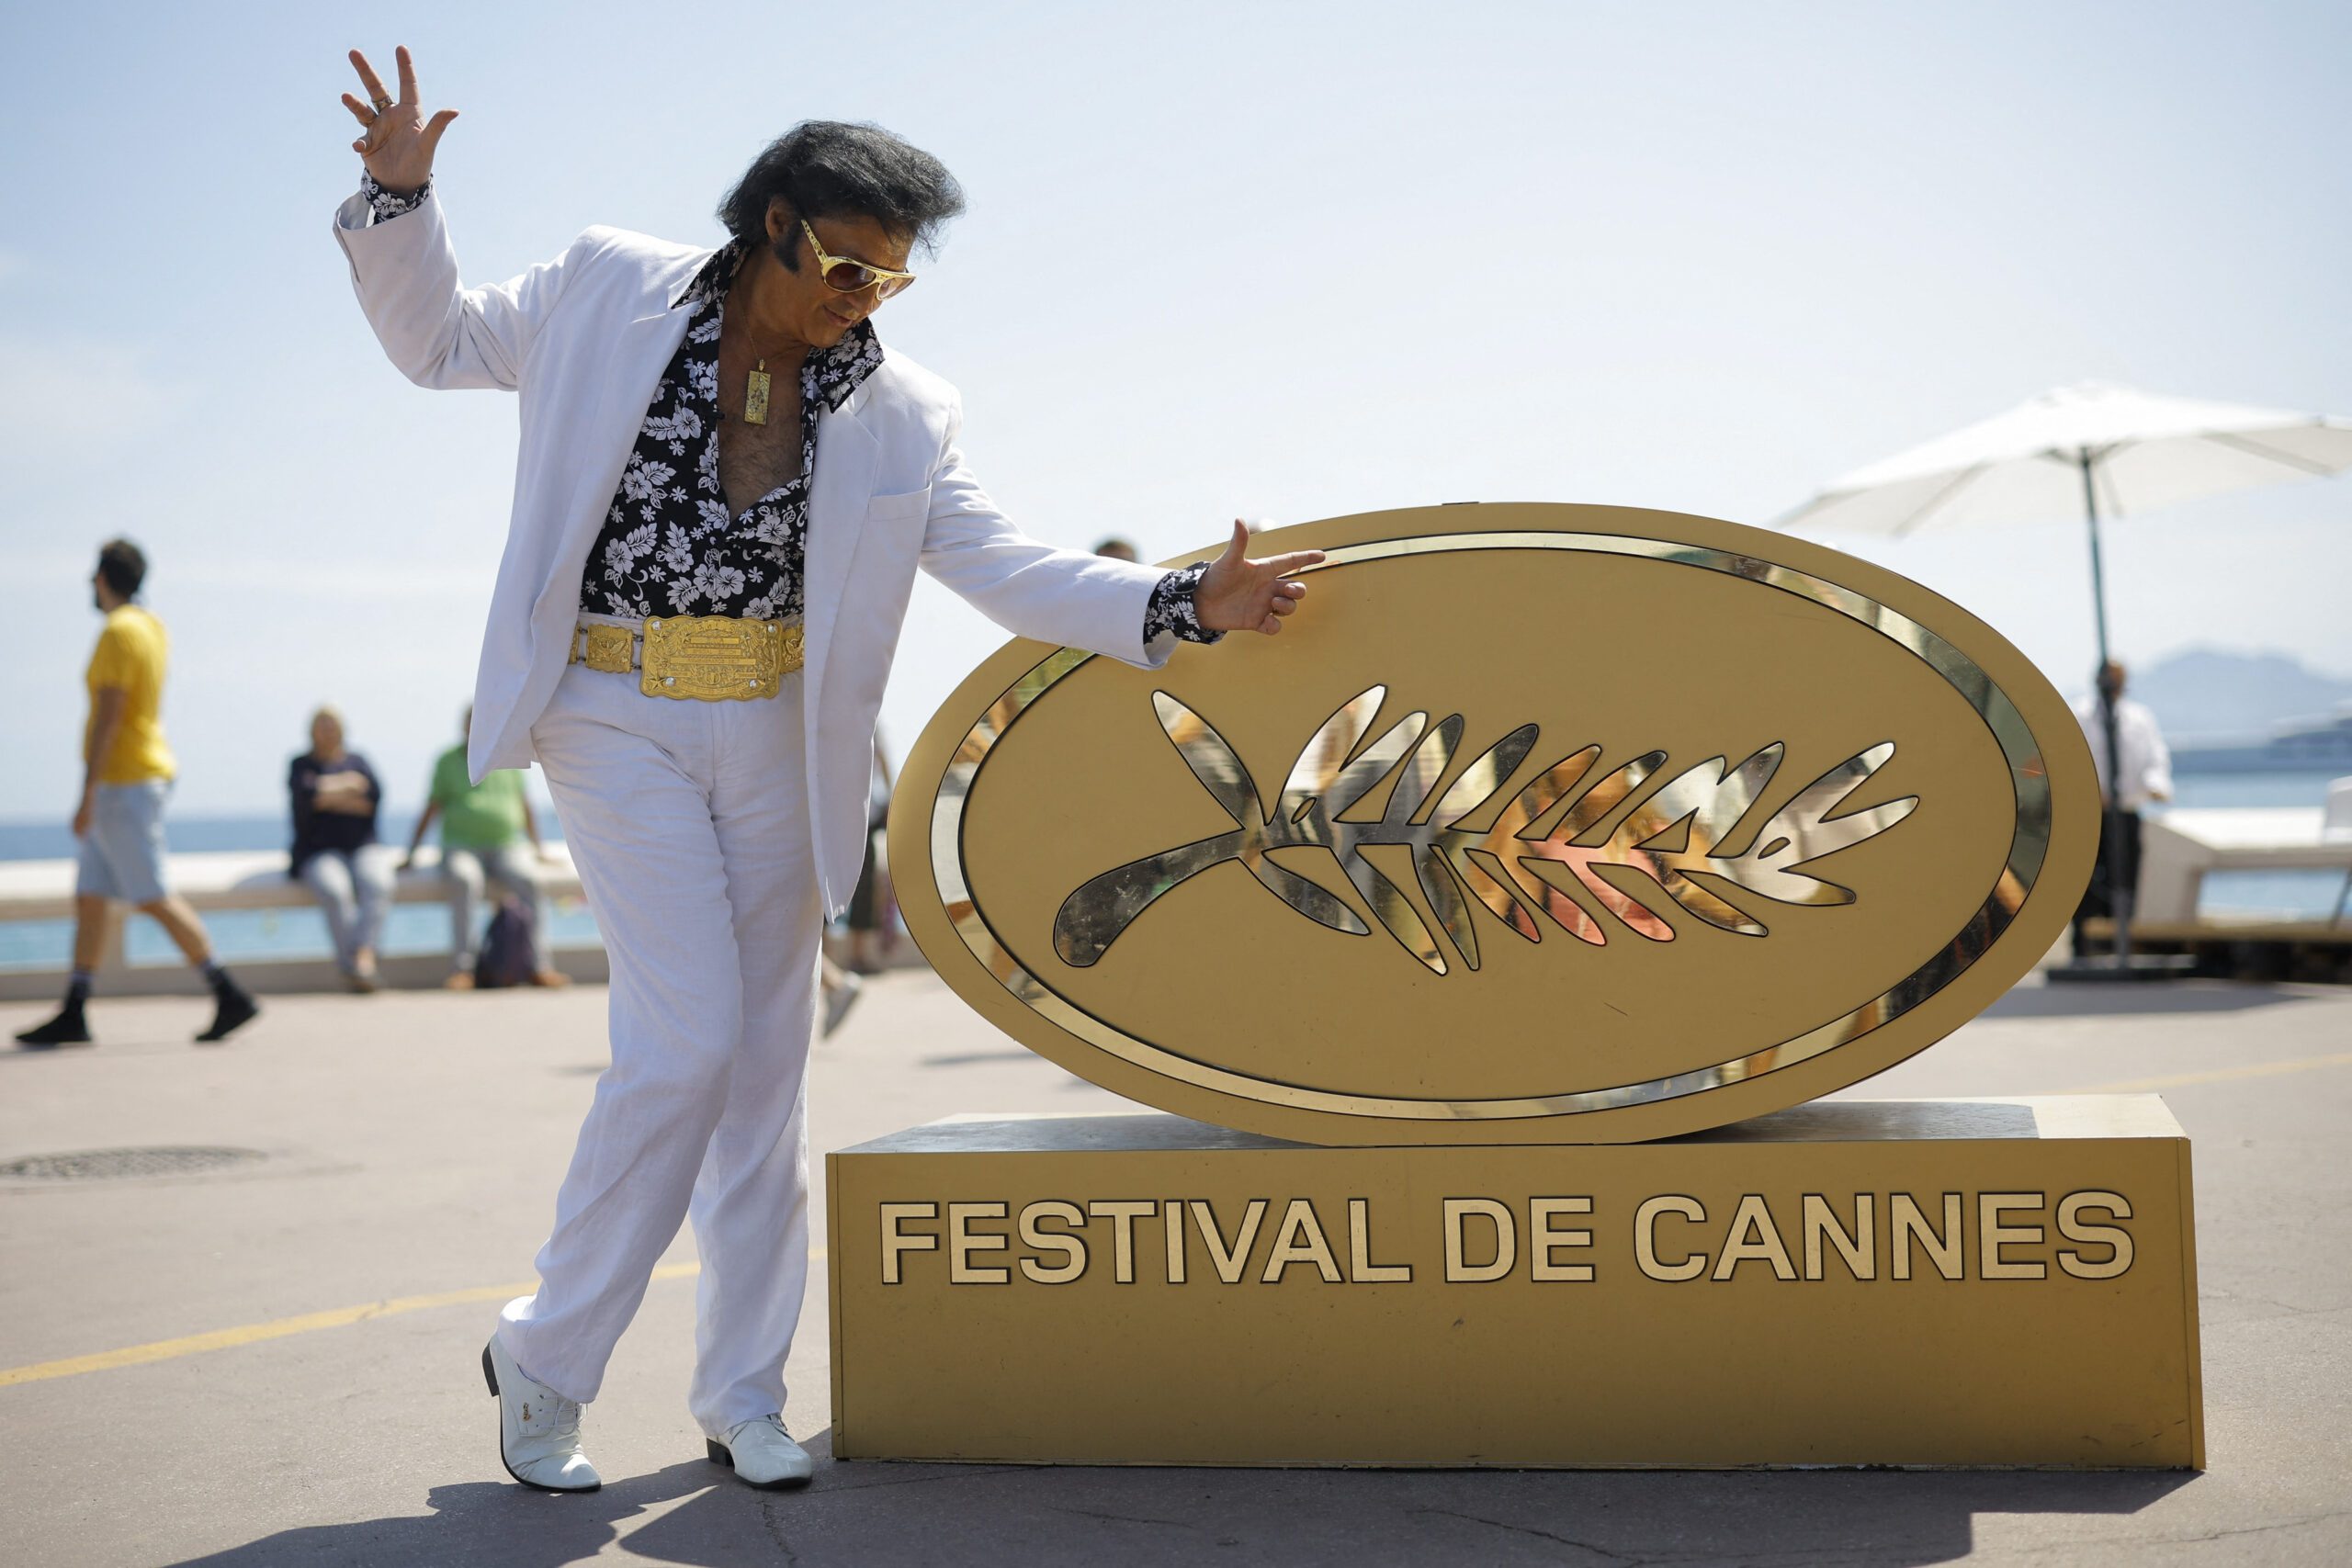 Elvis fever grips Cannes ahead of Luhrmann biopic premiere